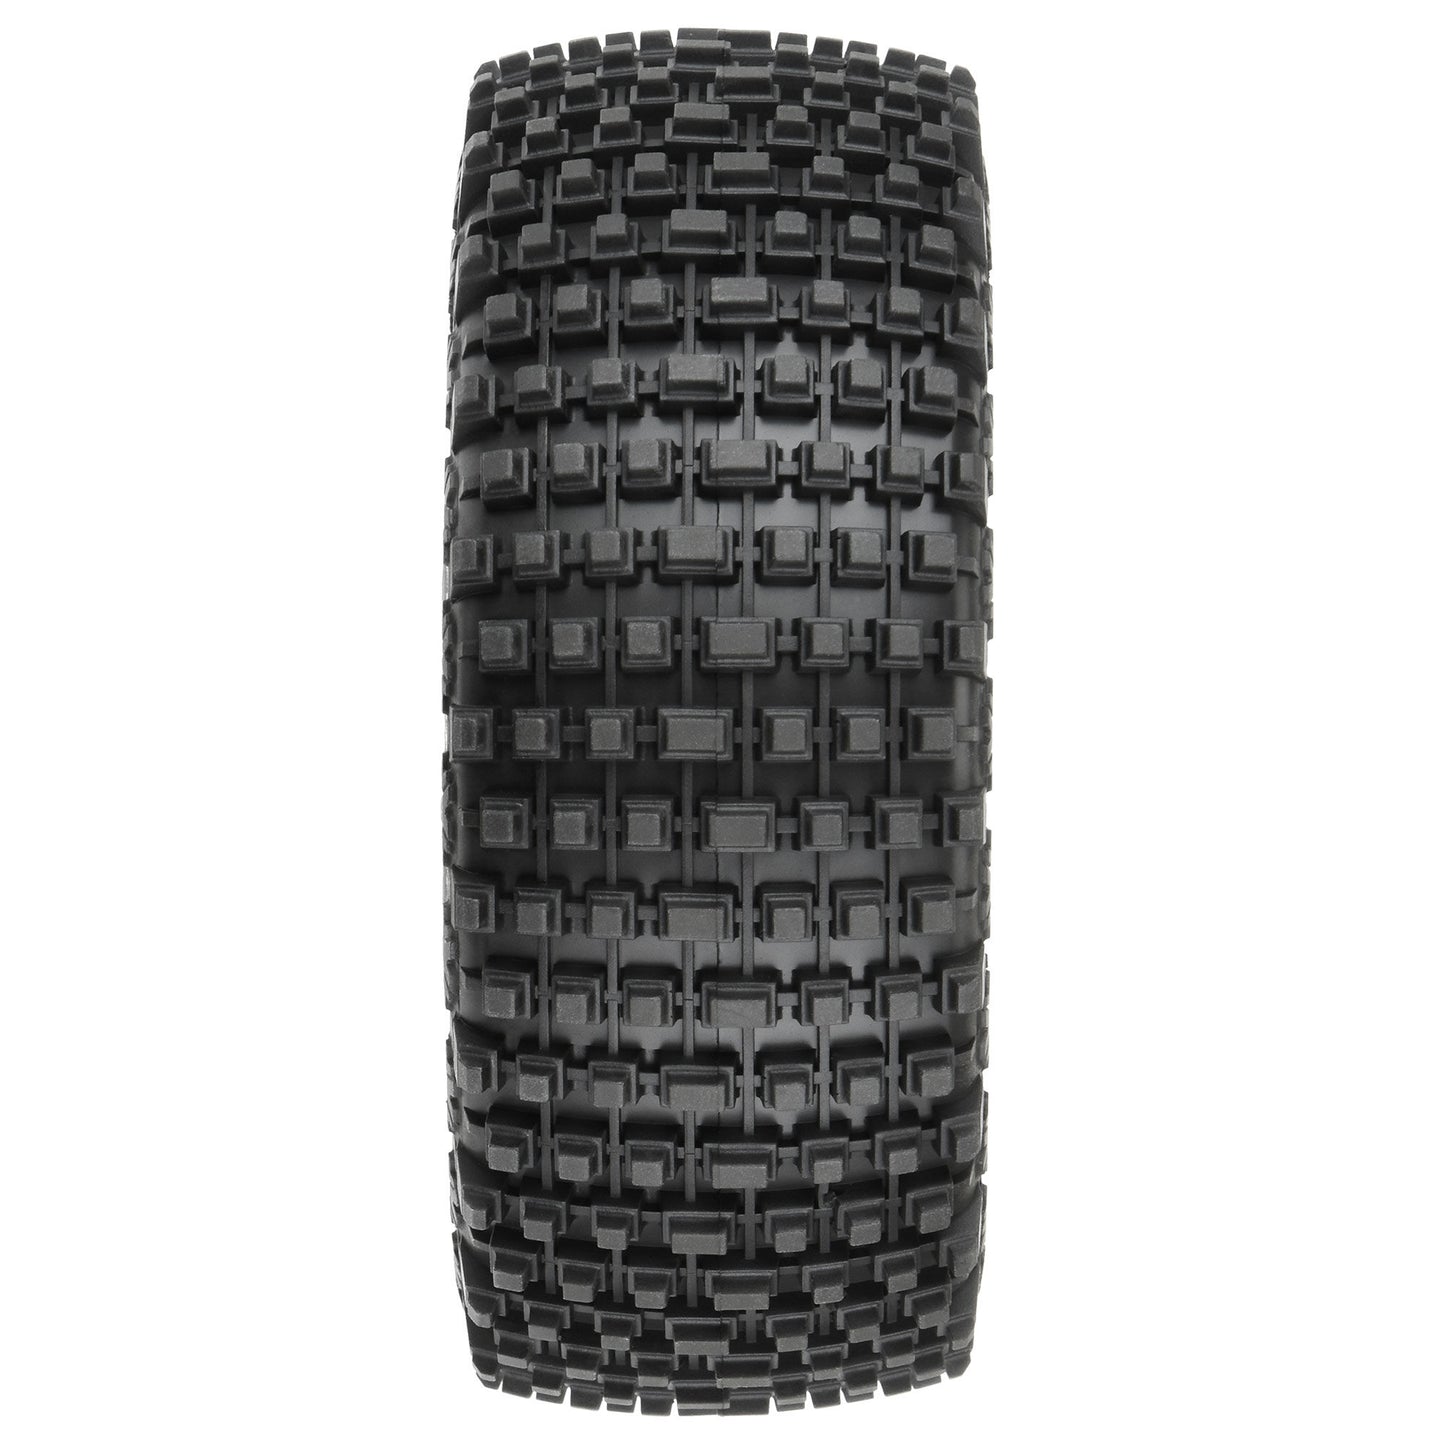 1/8 Gladiator M3 Front/Rear Off-Road Buggy  tyres (2)